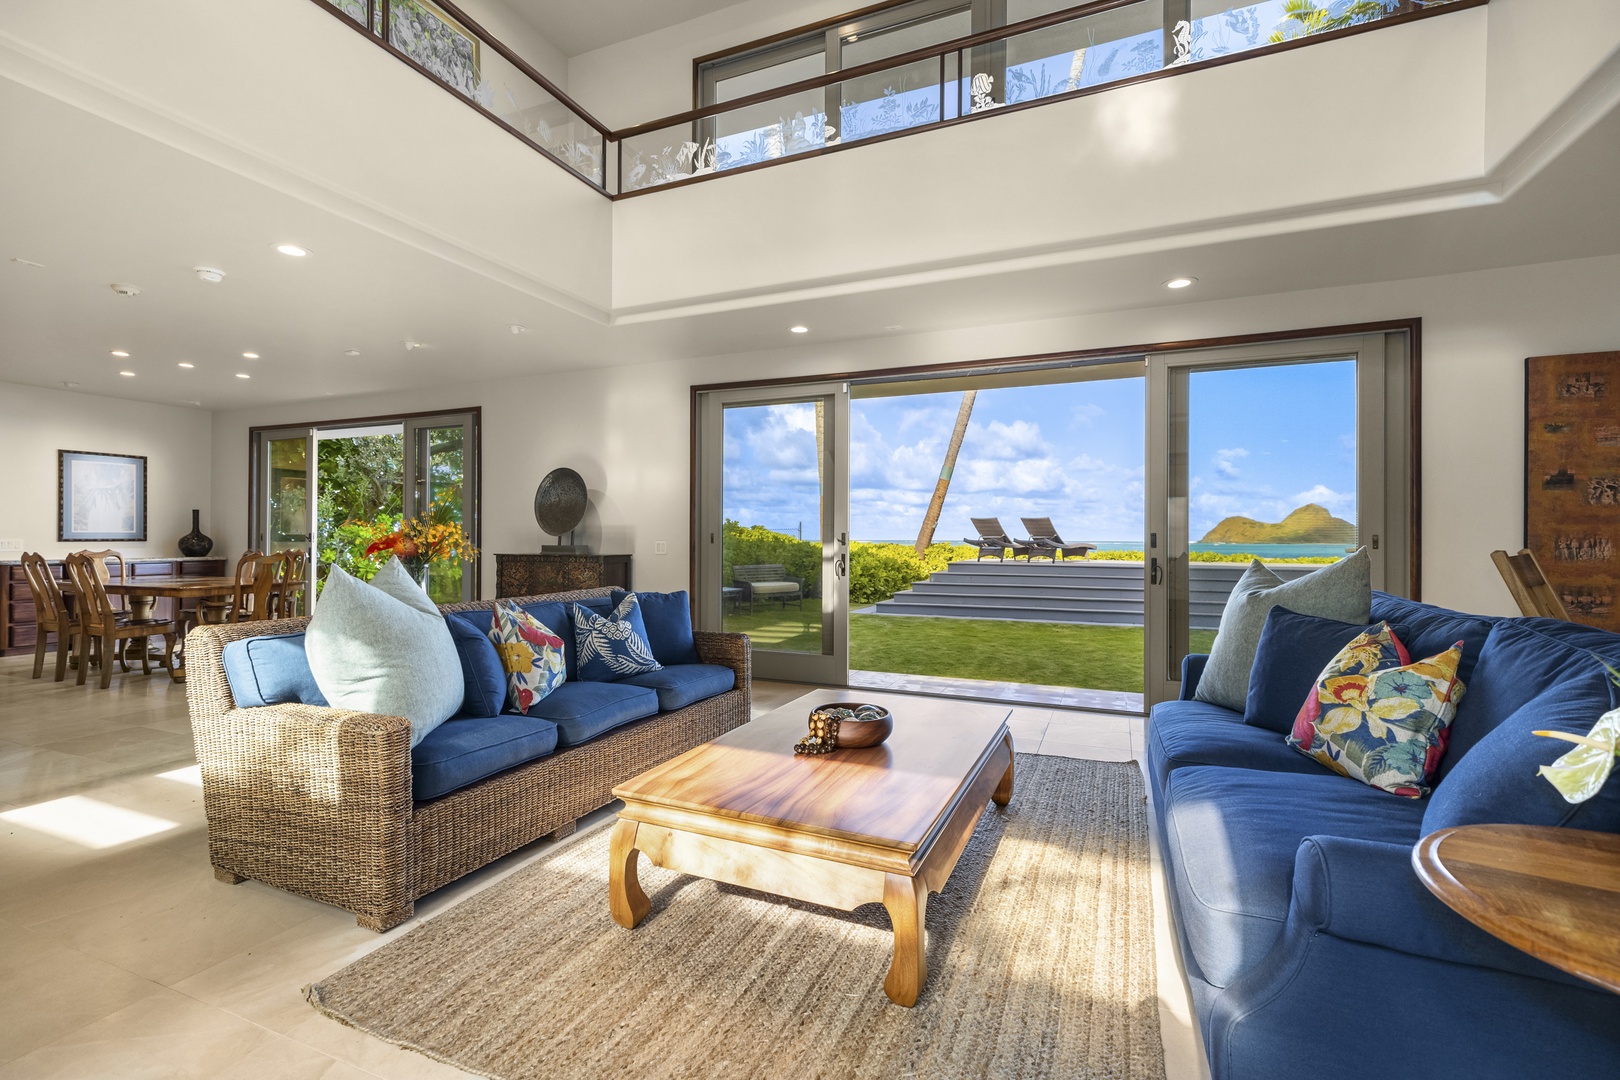 Kailua Vacation Rentals, Mokulua Sunrise - Beautiful views from everywhere in the house